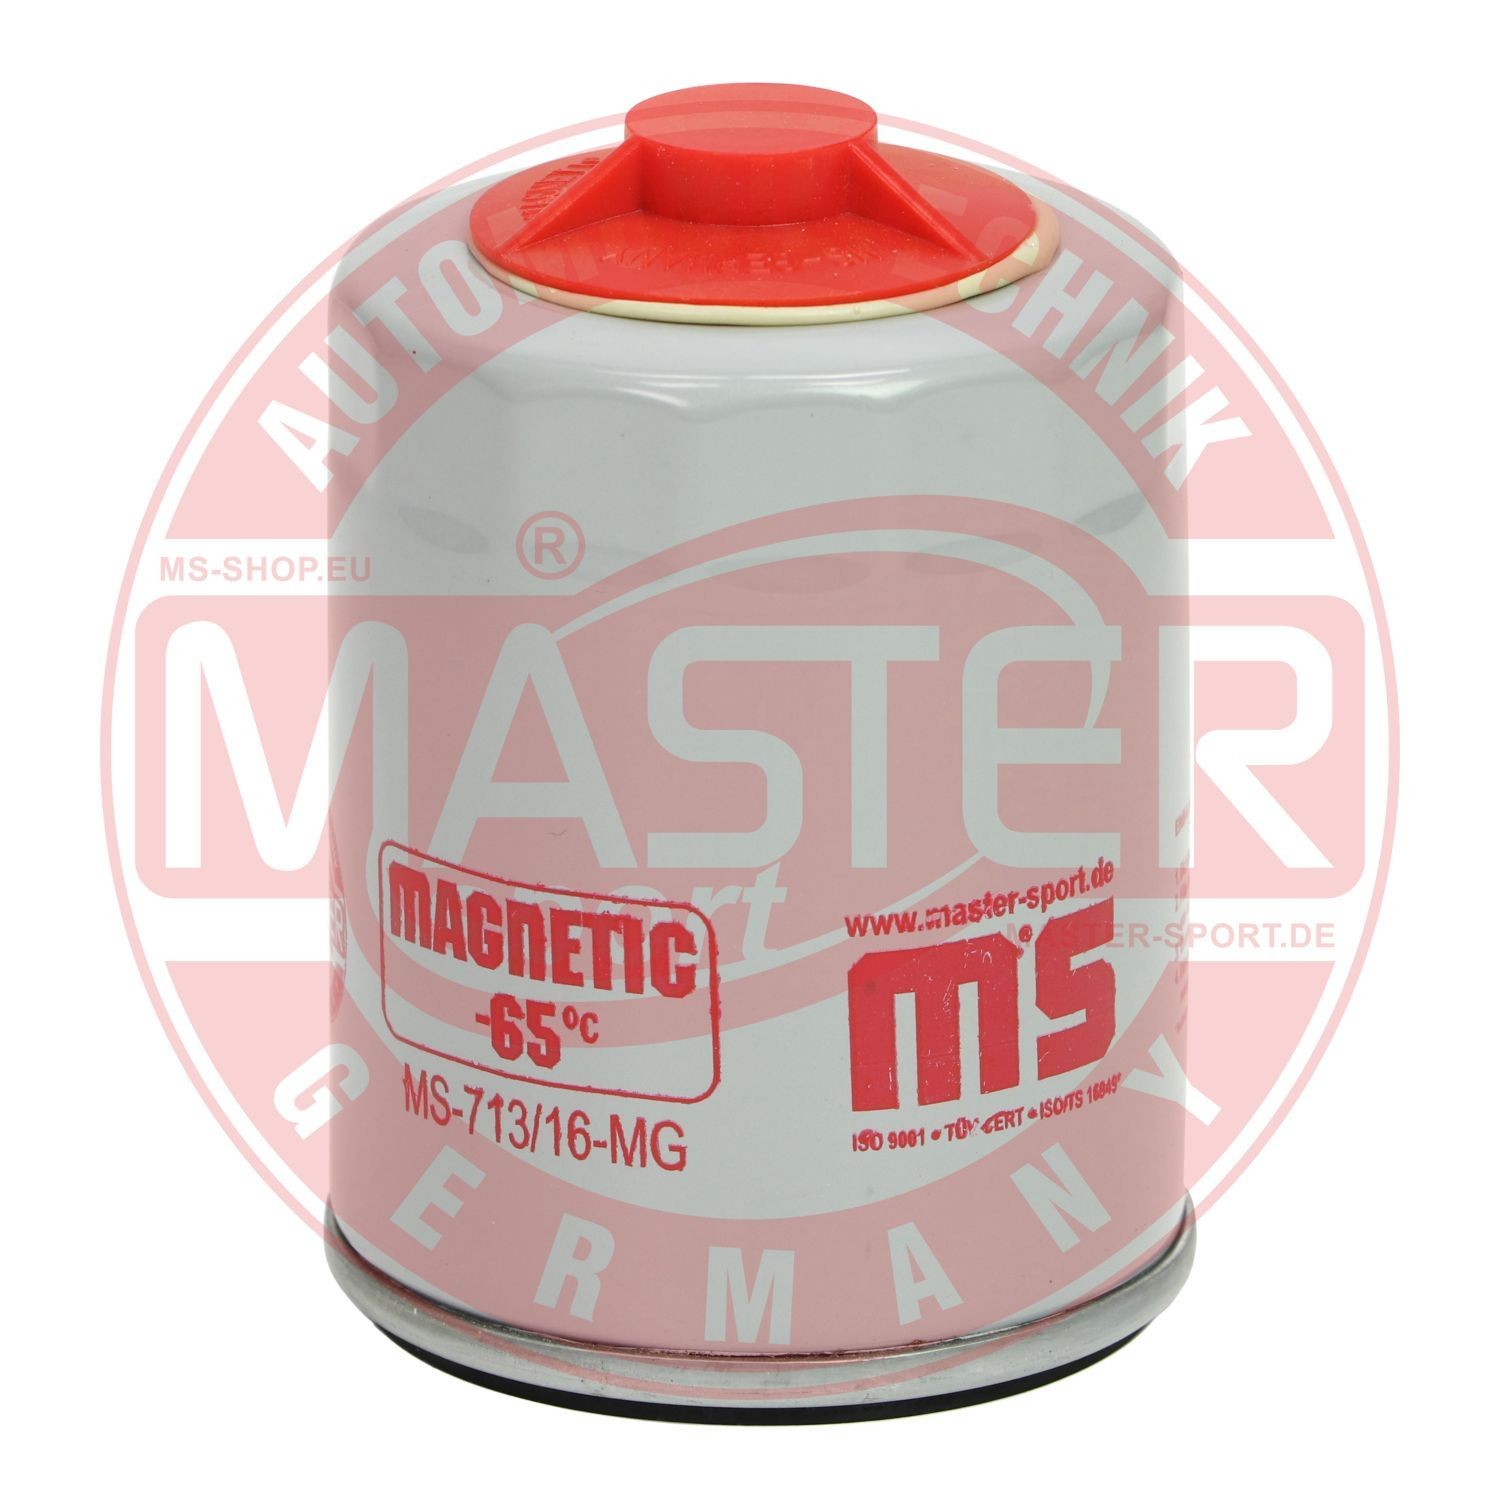 MASTER-SPORT 713/16-MG-OF-PCS-MS Oil filter M 20 X 1.5, with one anti-return valve, Filter Insert